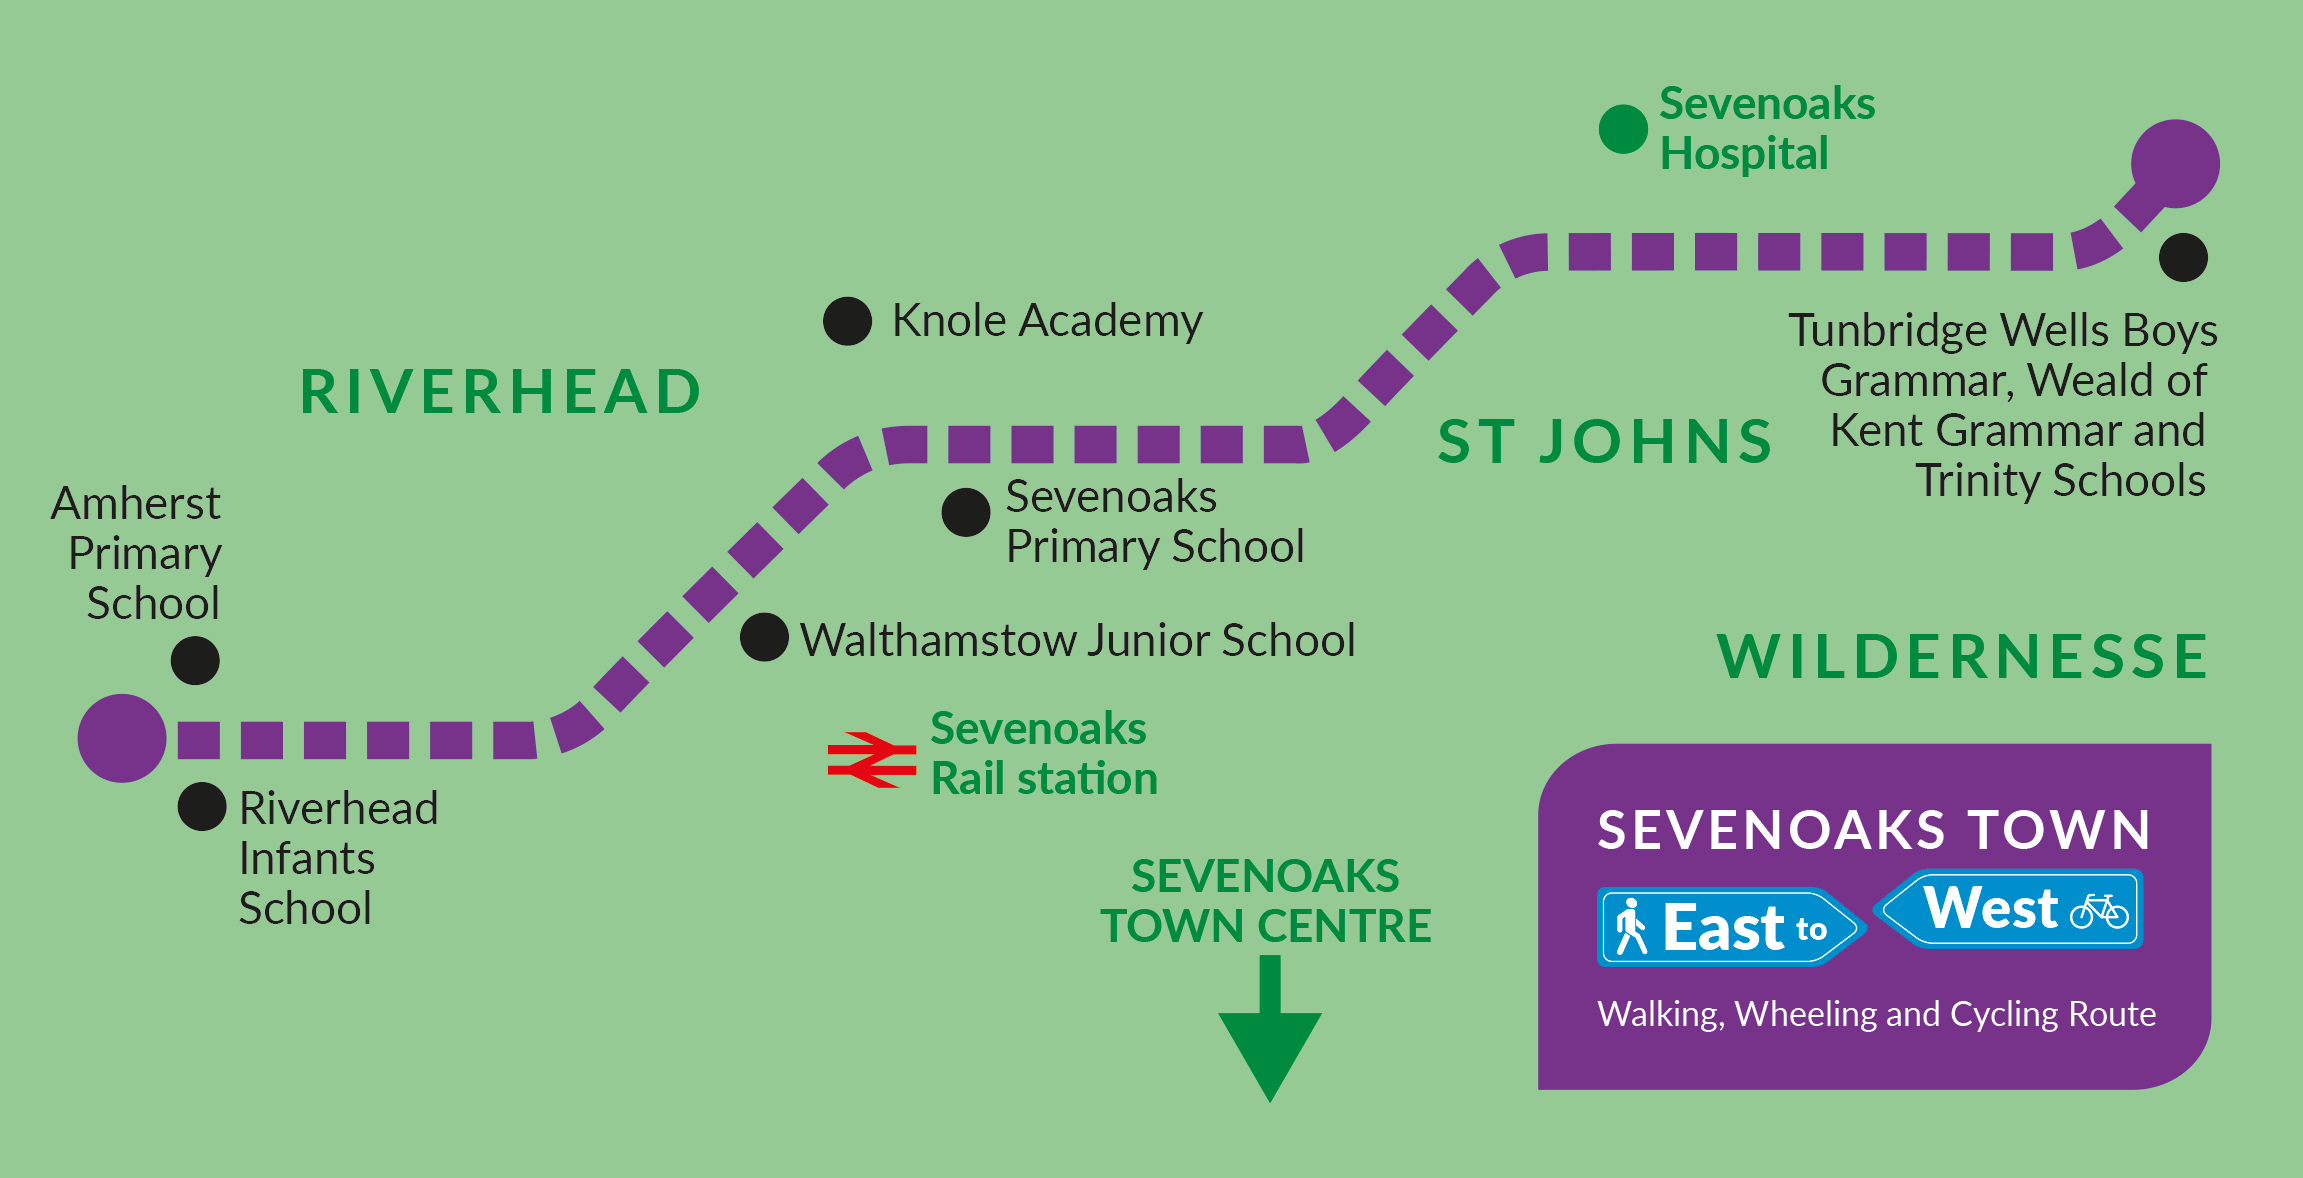 The route connects many of the town’s schools with the communities they serve, from Riverhead and Amherst Schools in the west with Trinity, Weald of Kent and Tunbridge Wells Grammar School for Boys annexes in the east. The route also goes via Sevenoaks Primary School and Walthamstow Hall Junior School and close to Knole Academy and Sevenoaks railway station.